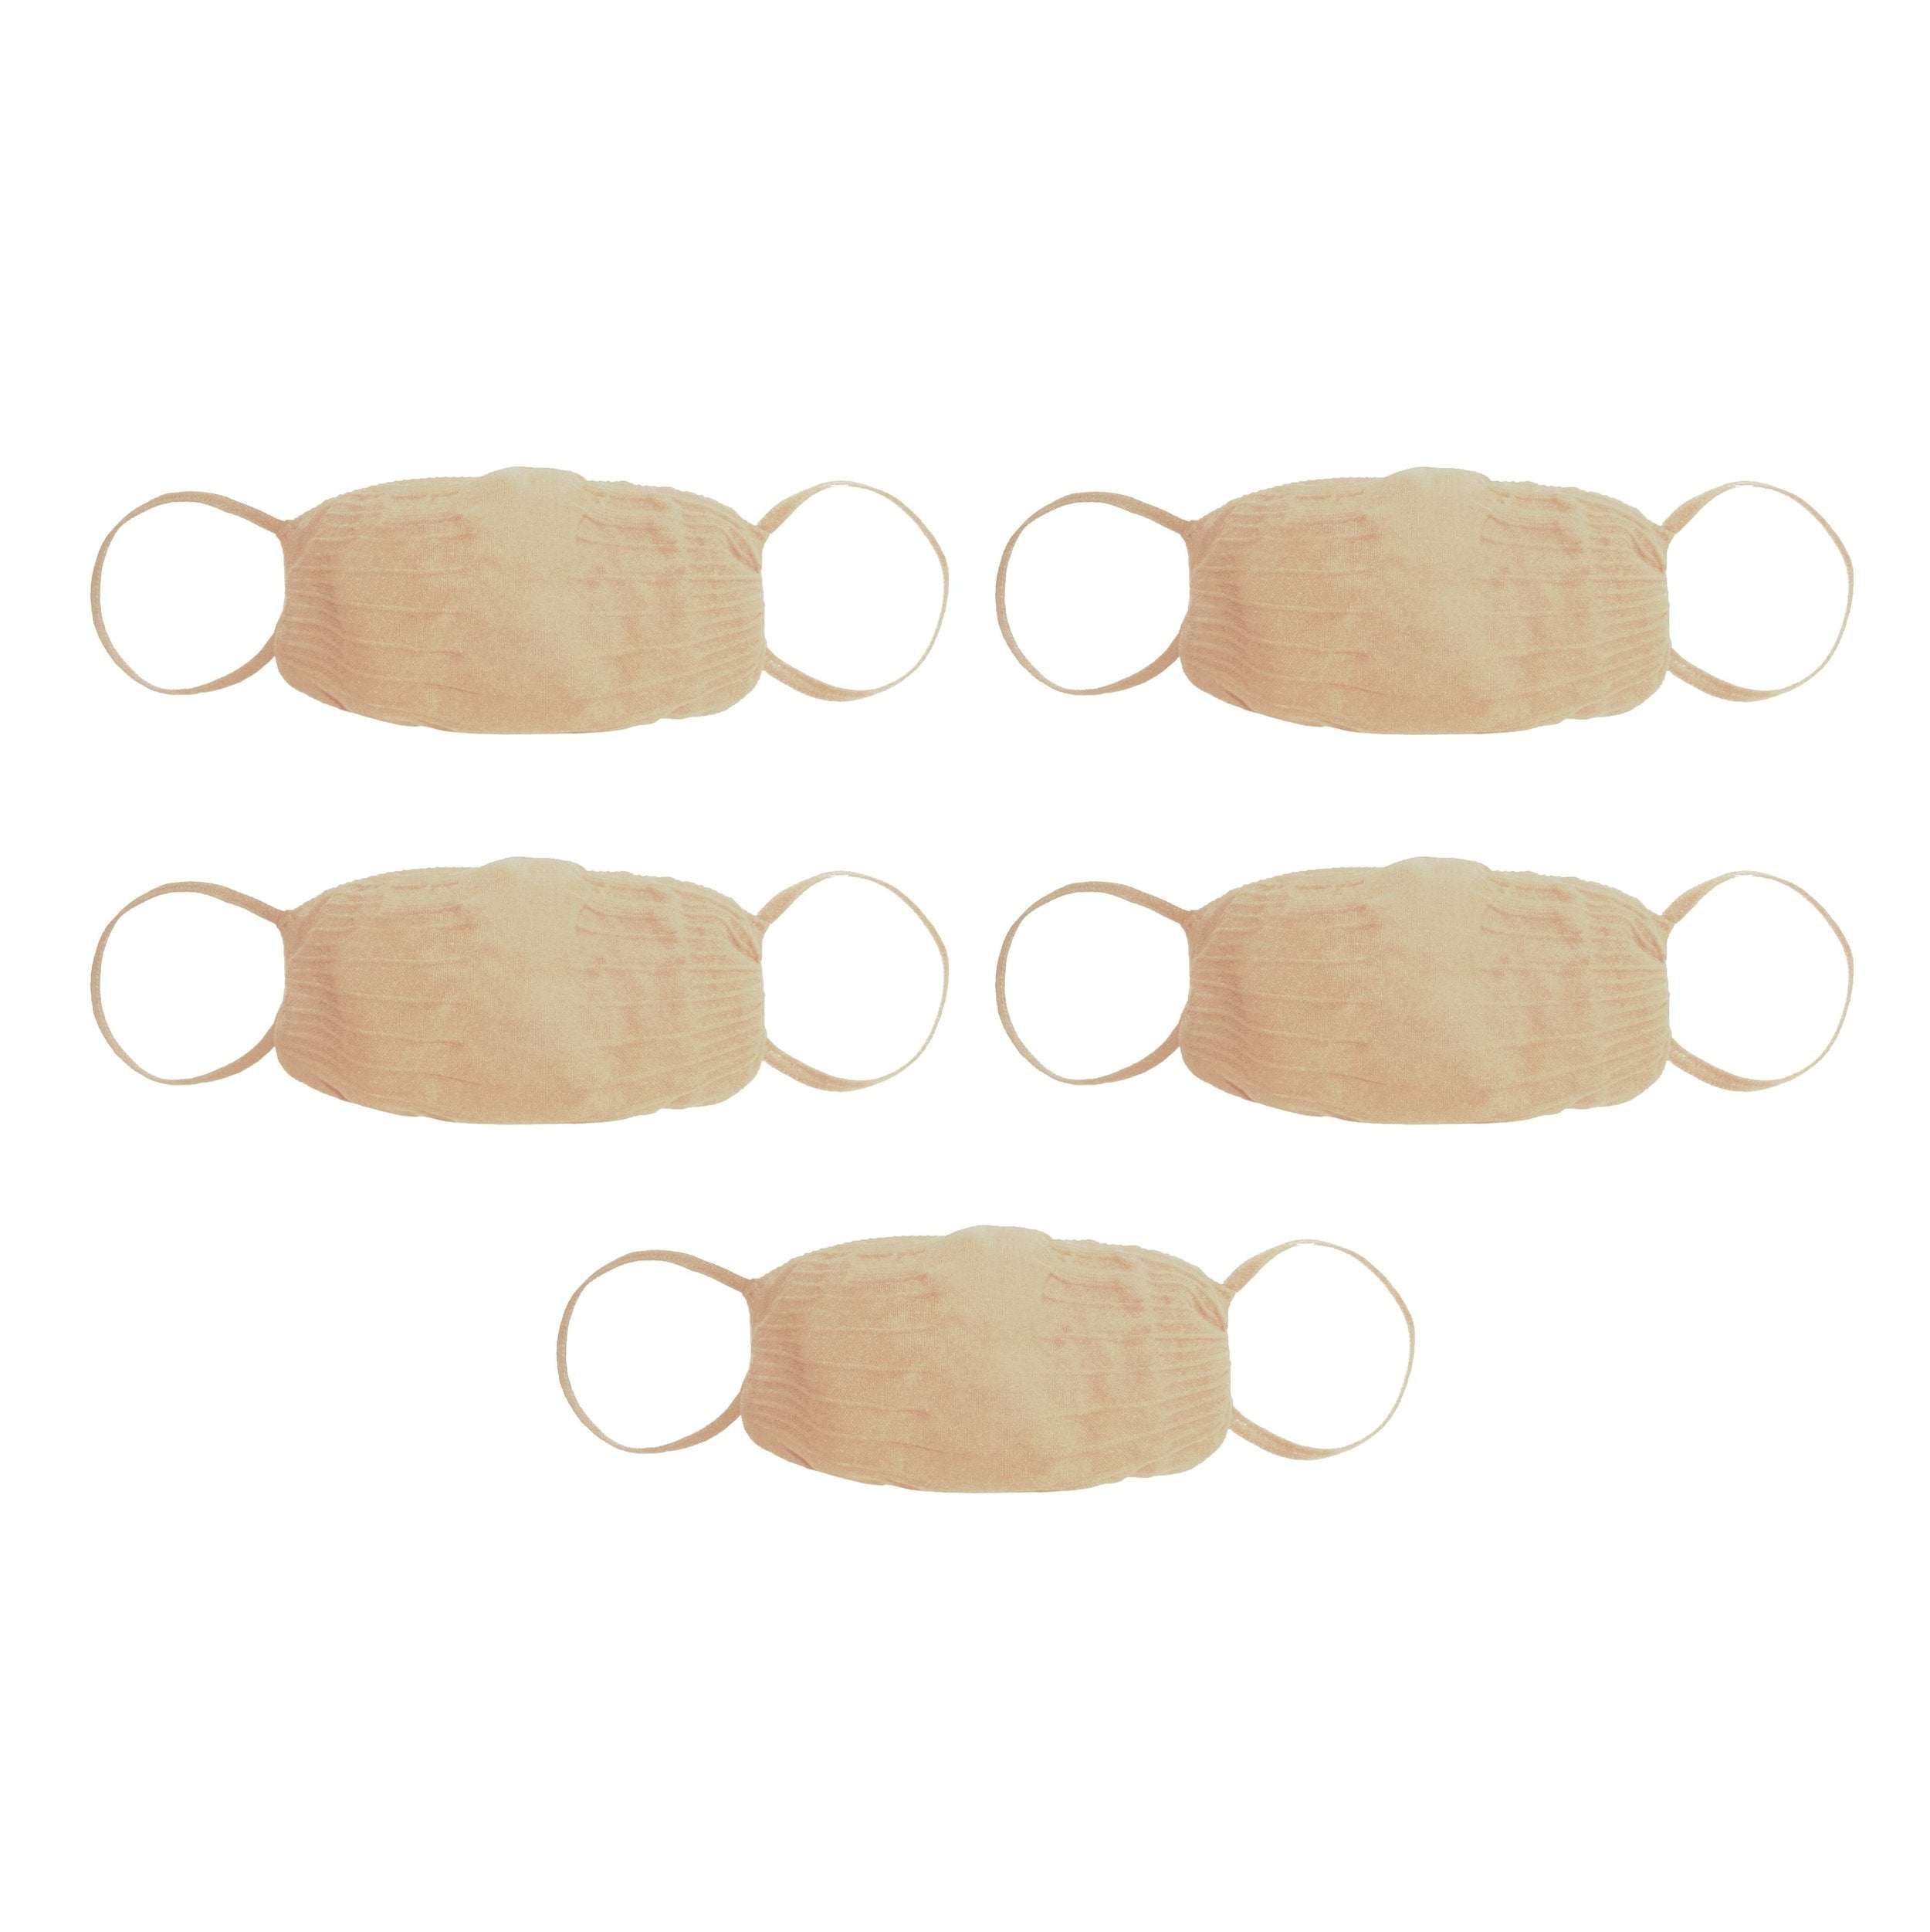 FACE MASK 5 PACK - CLAY | SKIMS